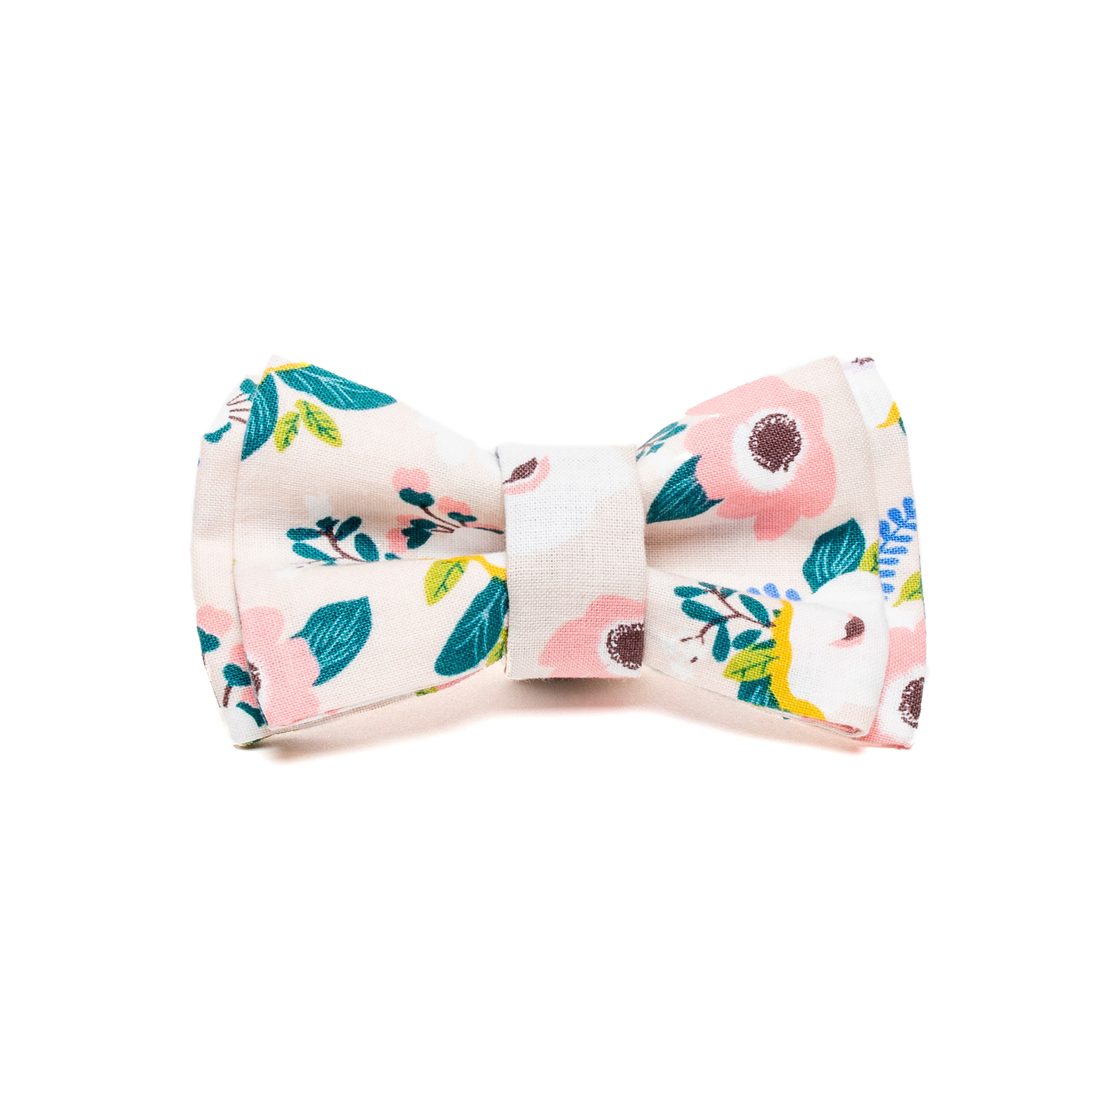 Eat Play Wag Bow Tie in Anemone - Organic Bunny